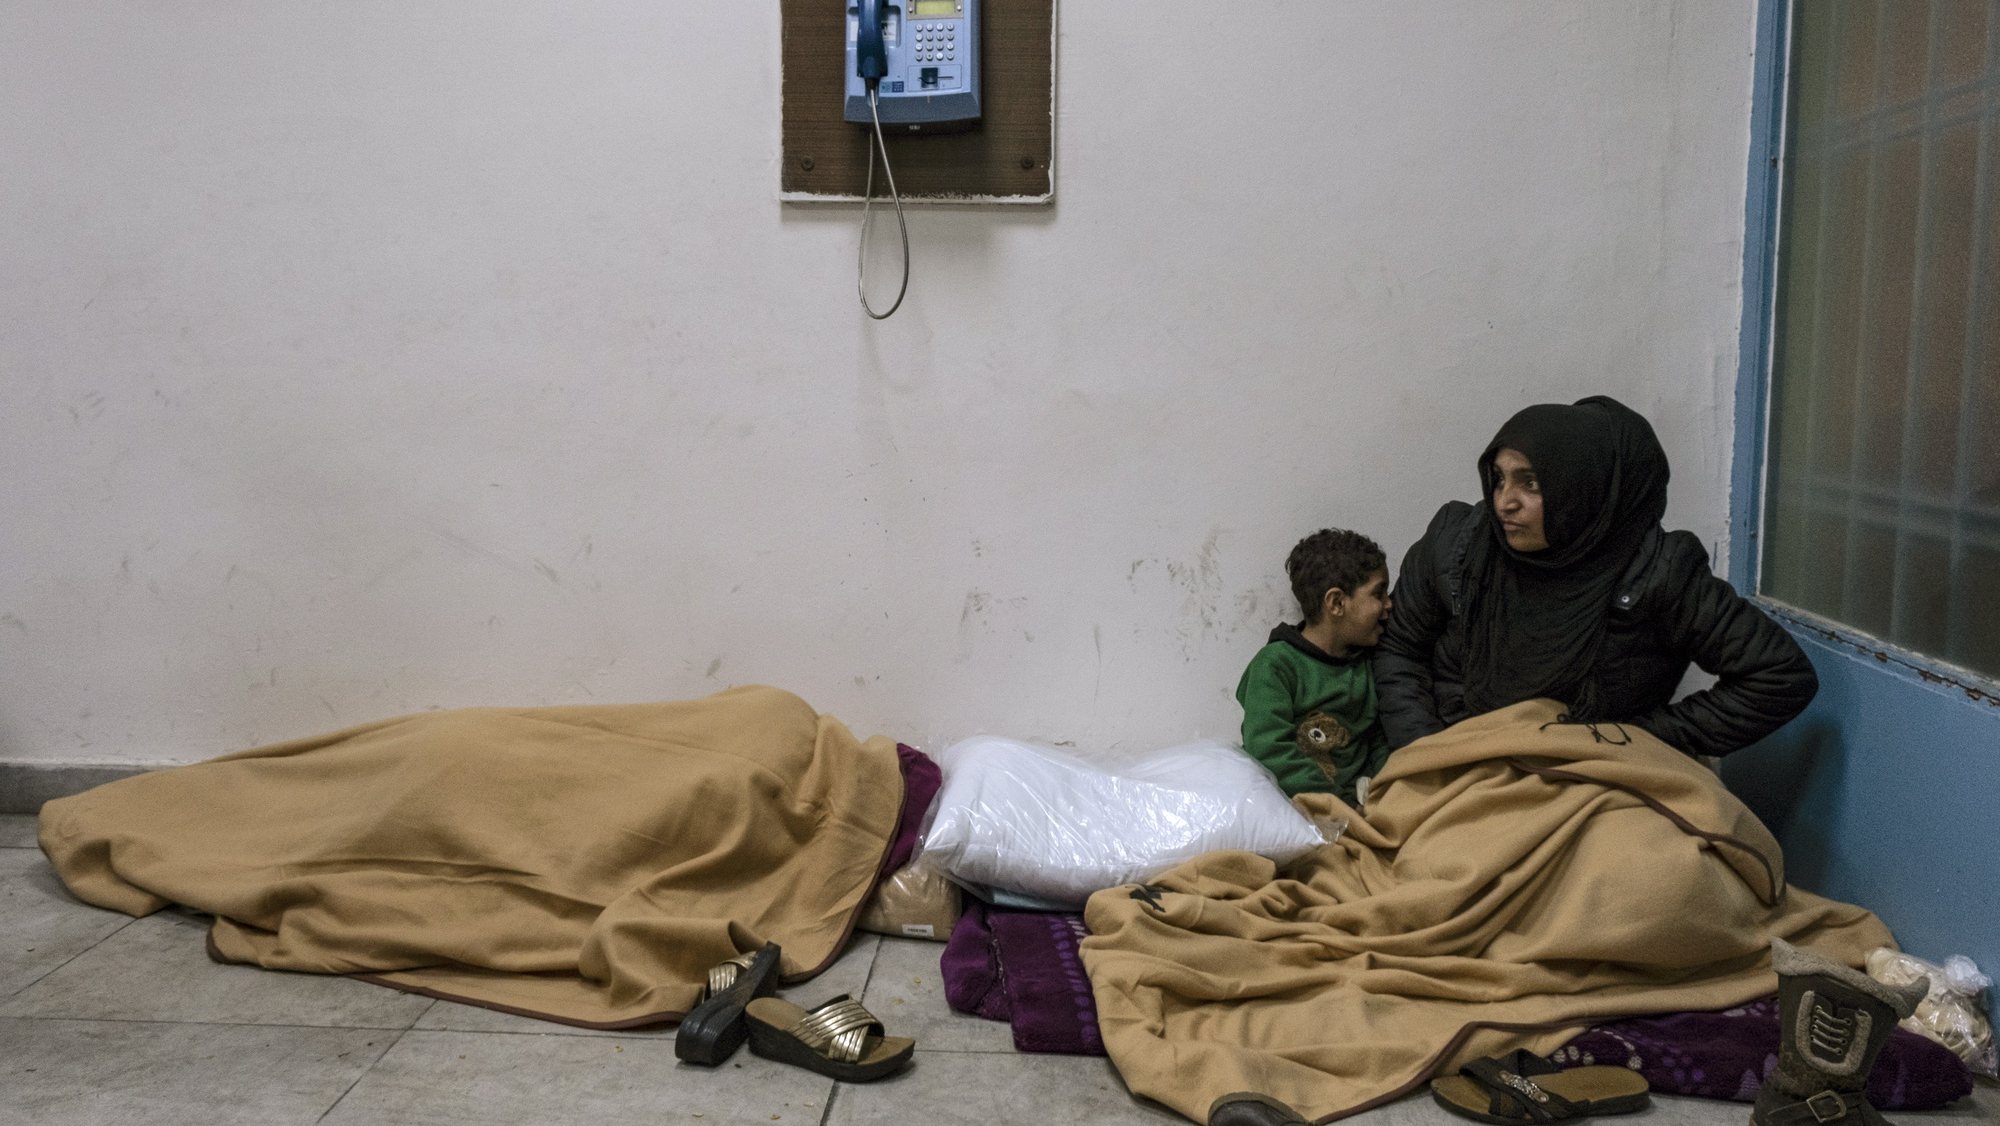 epa10452223 People take shelter in a state building following an earthquake in Diyarbakir, Turkey, 06 February 2023 (issued 07 February 2023). More than 4,000 people were killed and thousands more injured after a major 7.8 magnitude earthquake struck southern Turkey and northern Syria on 06 February. Authorities fear the death toll will keep climbing as rescuers look for survivors across the region.  EPA/REFIK TEKIN